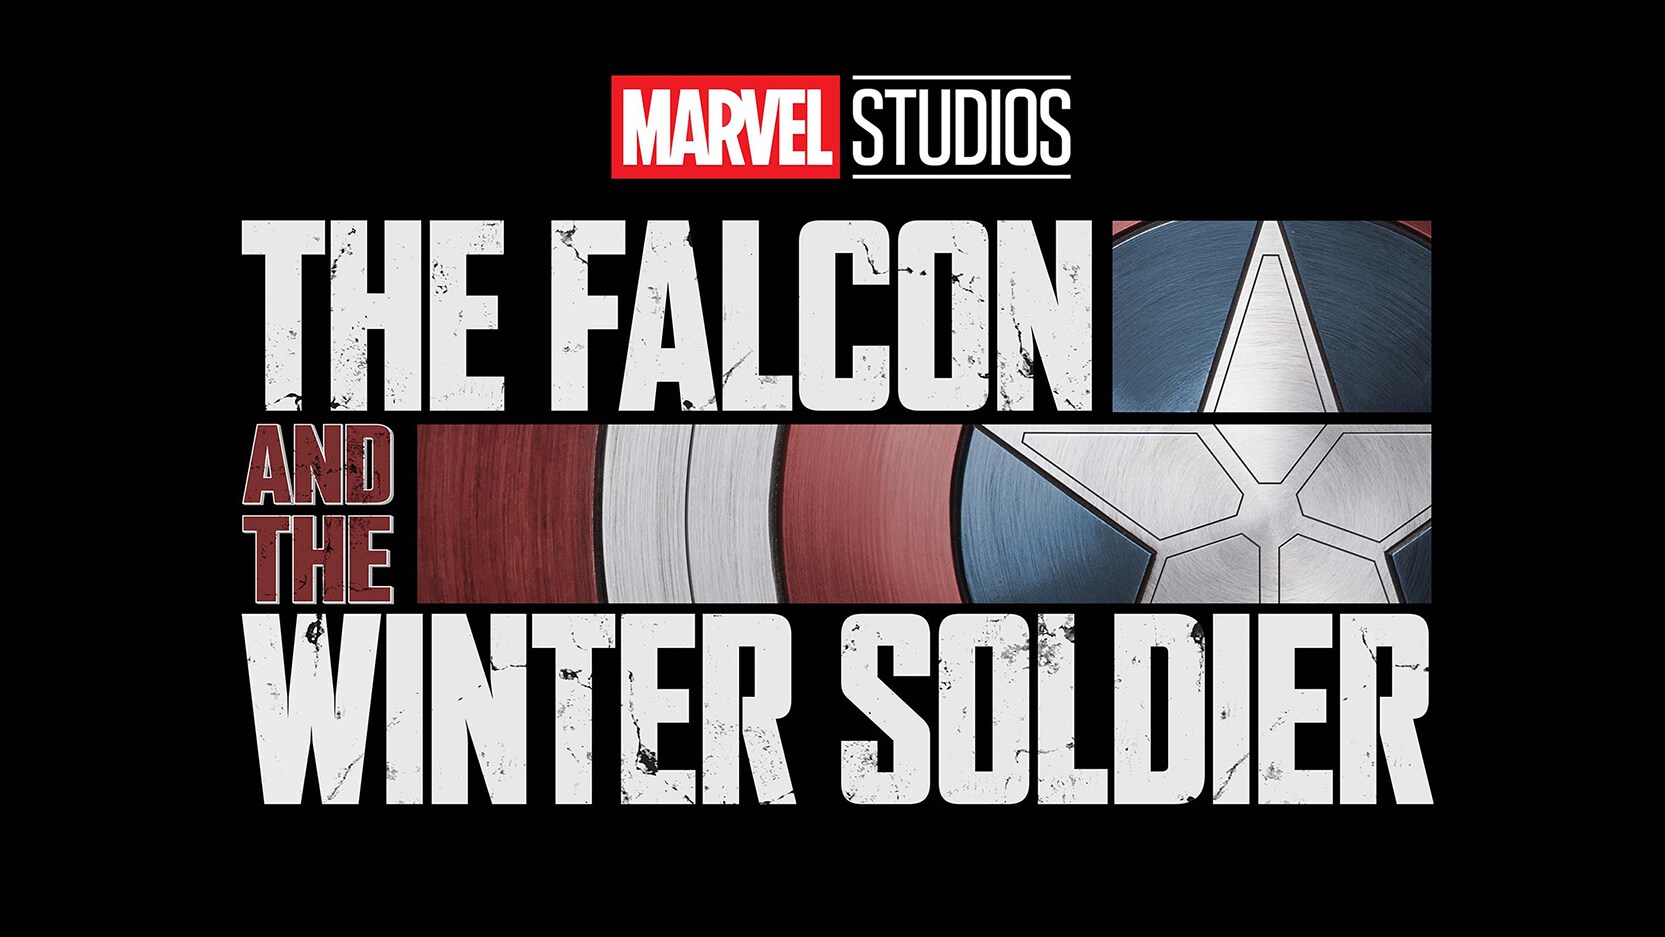 Marvel Studios’ “The Falcon and The Winter Soldier” Character Posters Now Available